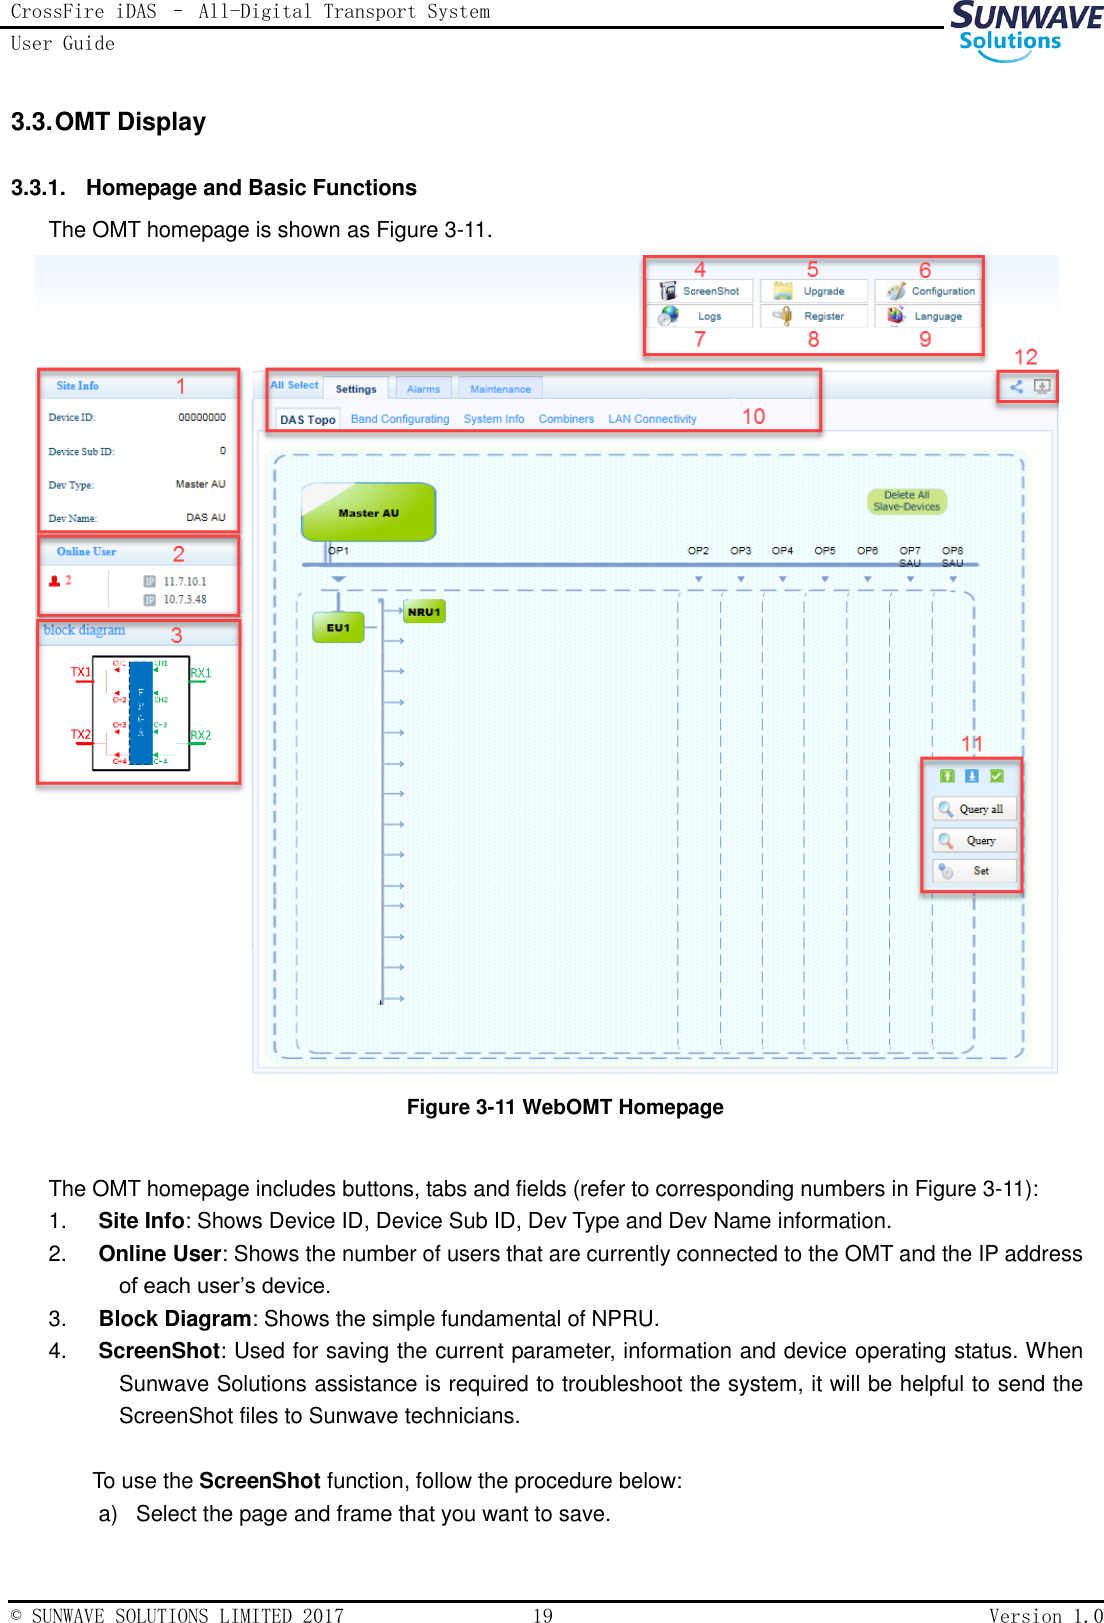 CrossFire iDAS – All-Digital Transport System User Guide   © SUNWAVE SOLUTIONS LIMITED 2017  19  Version 1.0  3.3. OMT Display 3.3.1.  Homepage and Basic Functions The OMT homepage is shown as Figure 3-11.    Figure 3-11 WebOMT Homepage  The OMT homepage includes buttons, tabs and fields (refer to corresponding numbers in Figure 3-11): 1. Site Info: Shows Device ID, Device Sub ID, Dev Type and Dev Name information. 2. Online User: Shows the number of users that are currently connected to the OMT and the IP address of each user’s device. 3. Block Diagram: Shows the simple fundamental of NPRU. 4. ScreenShot: Used for saving the current parameter, information and device operating status. When Sunwave Solutions assistance is required to troubleshoot the system, it will be helpful to send the ScreenShot files to Sunwave technicians.  To use the ScreenShot function, follow the procedure below: a)  Select the page and frame that you want to save. 